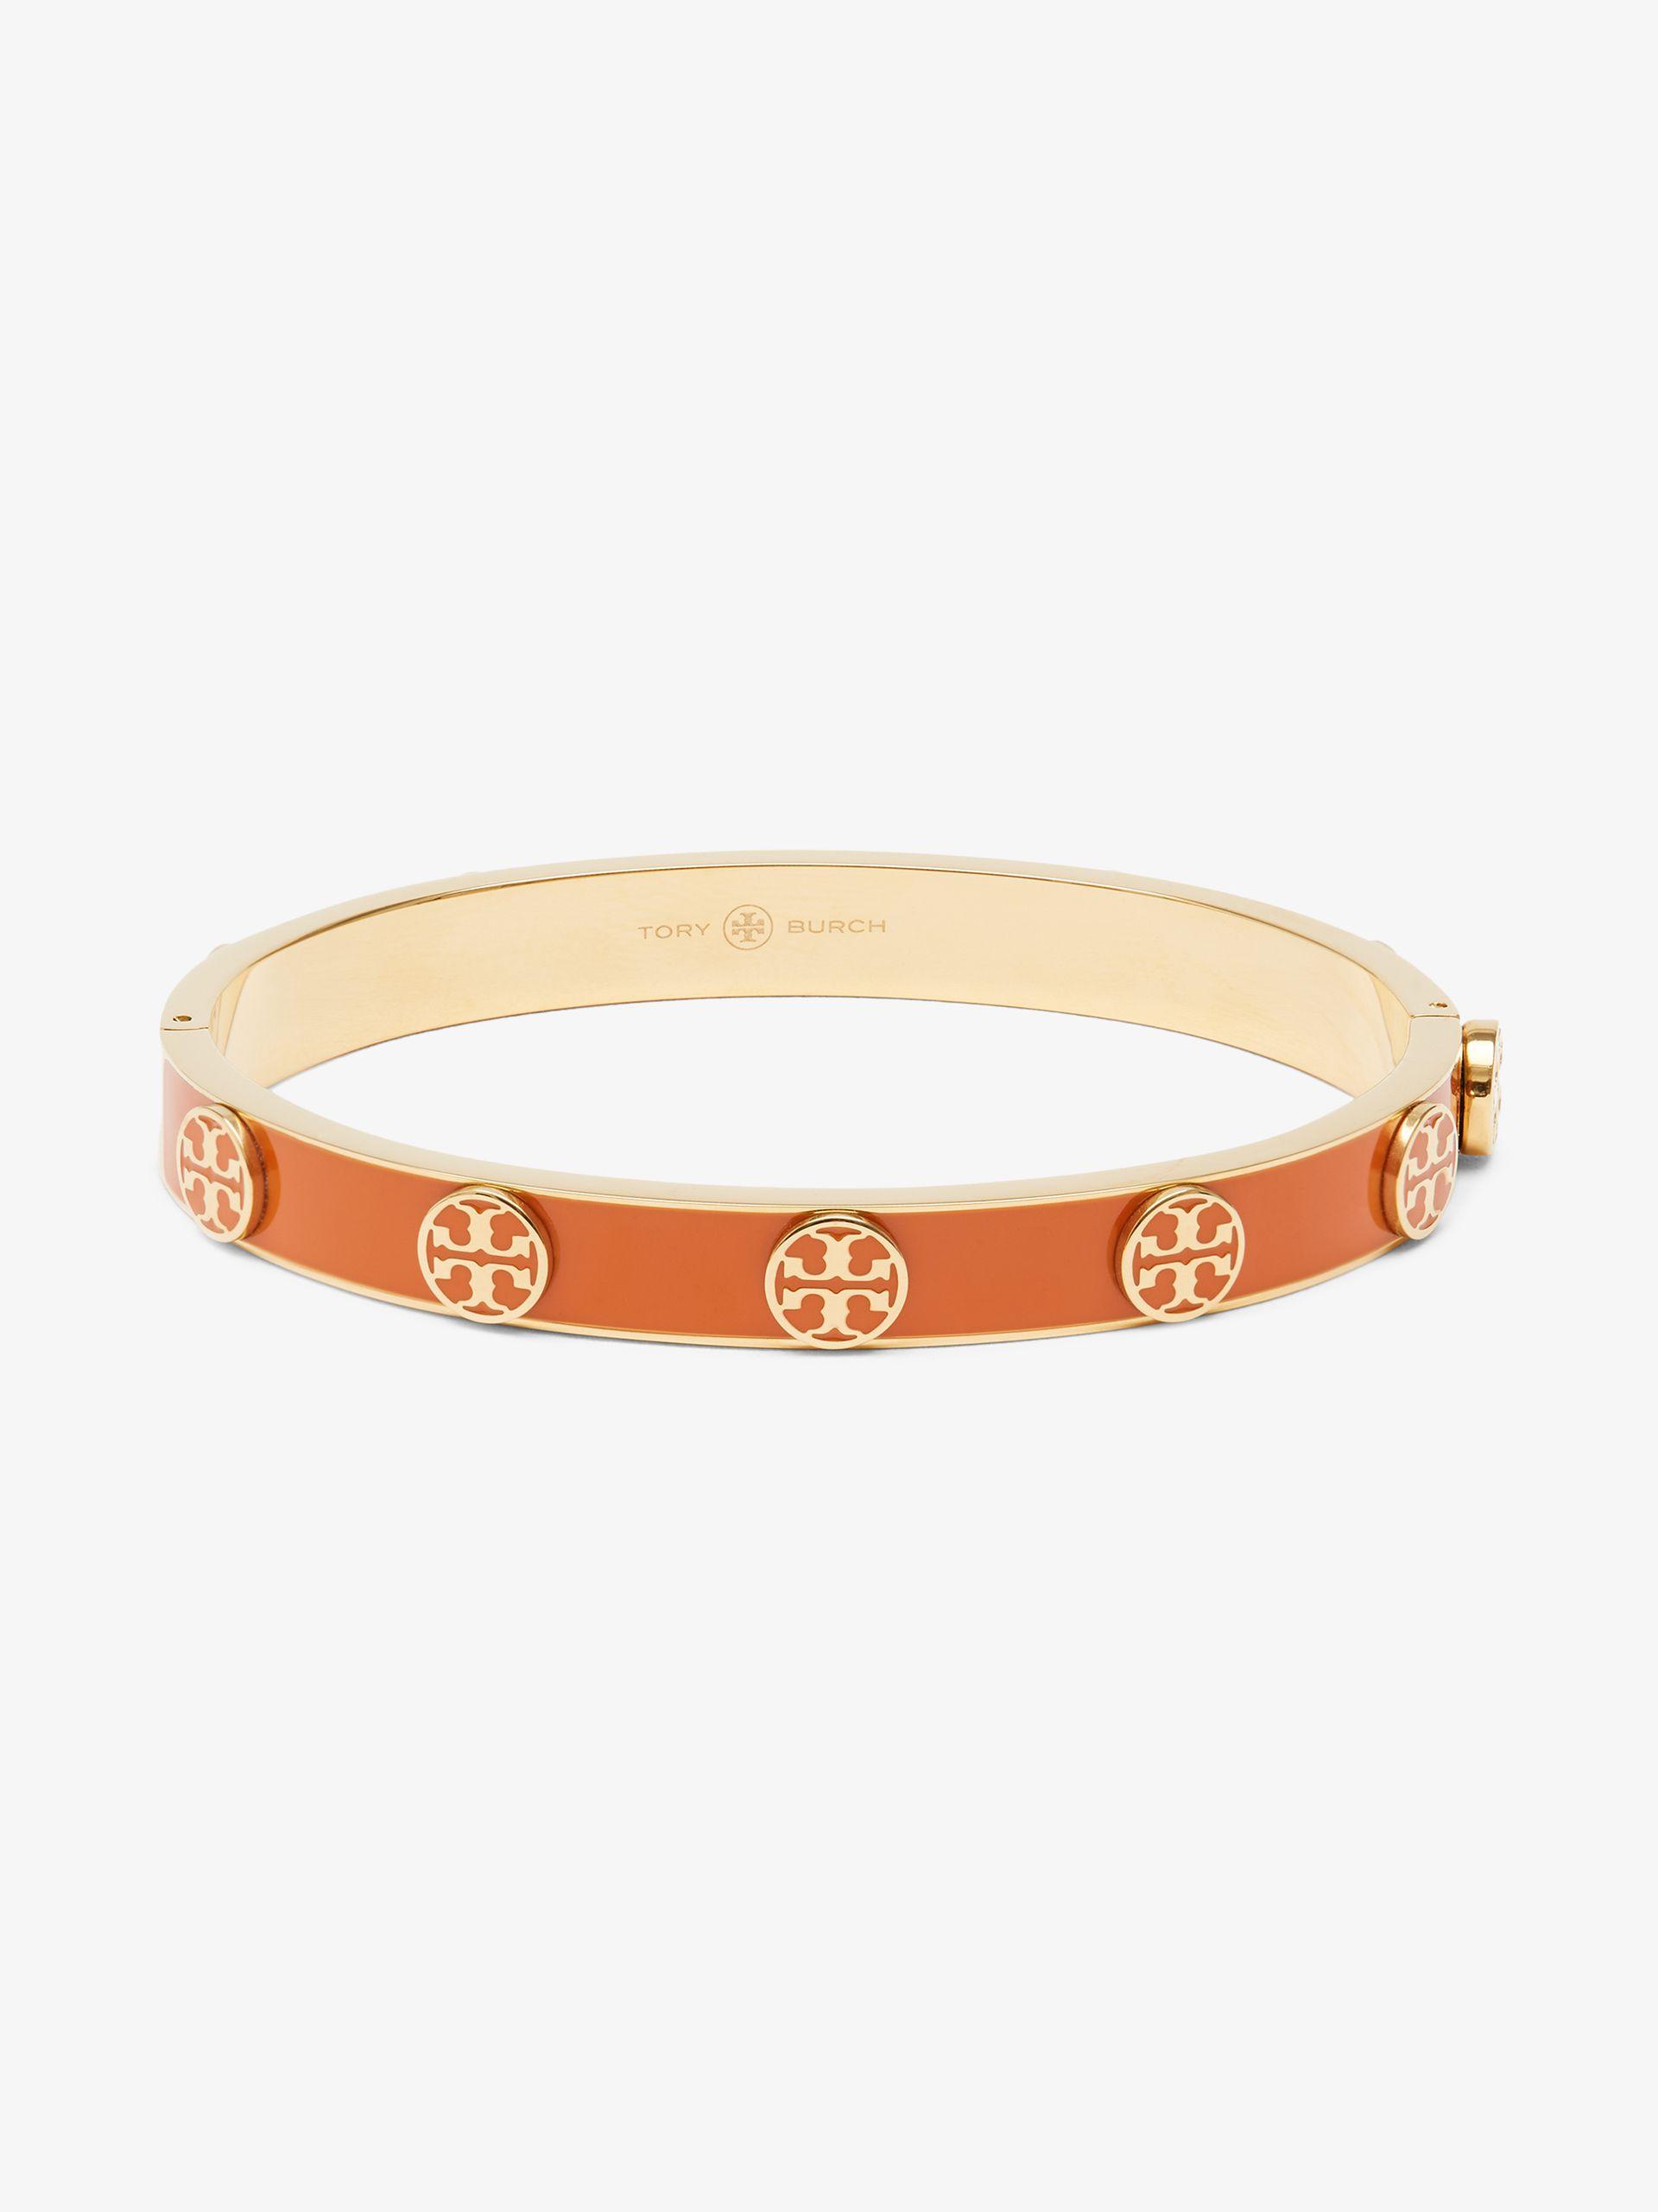 Tory Burch Red And Gold Tone Miller Hinge Stud Bracelet in 